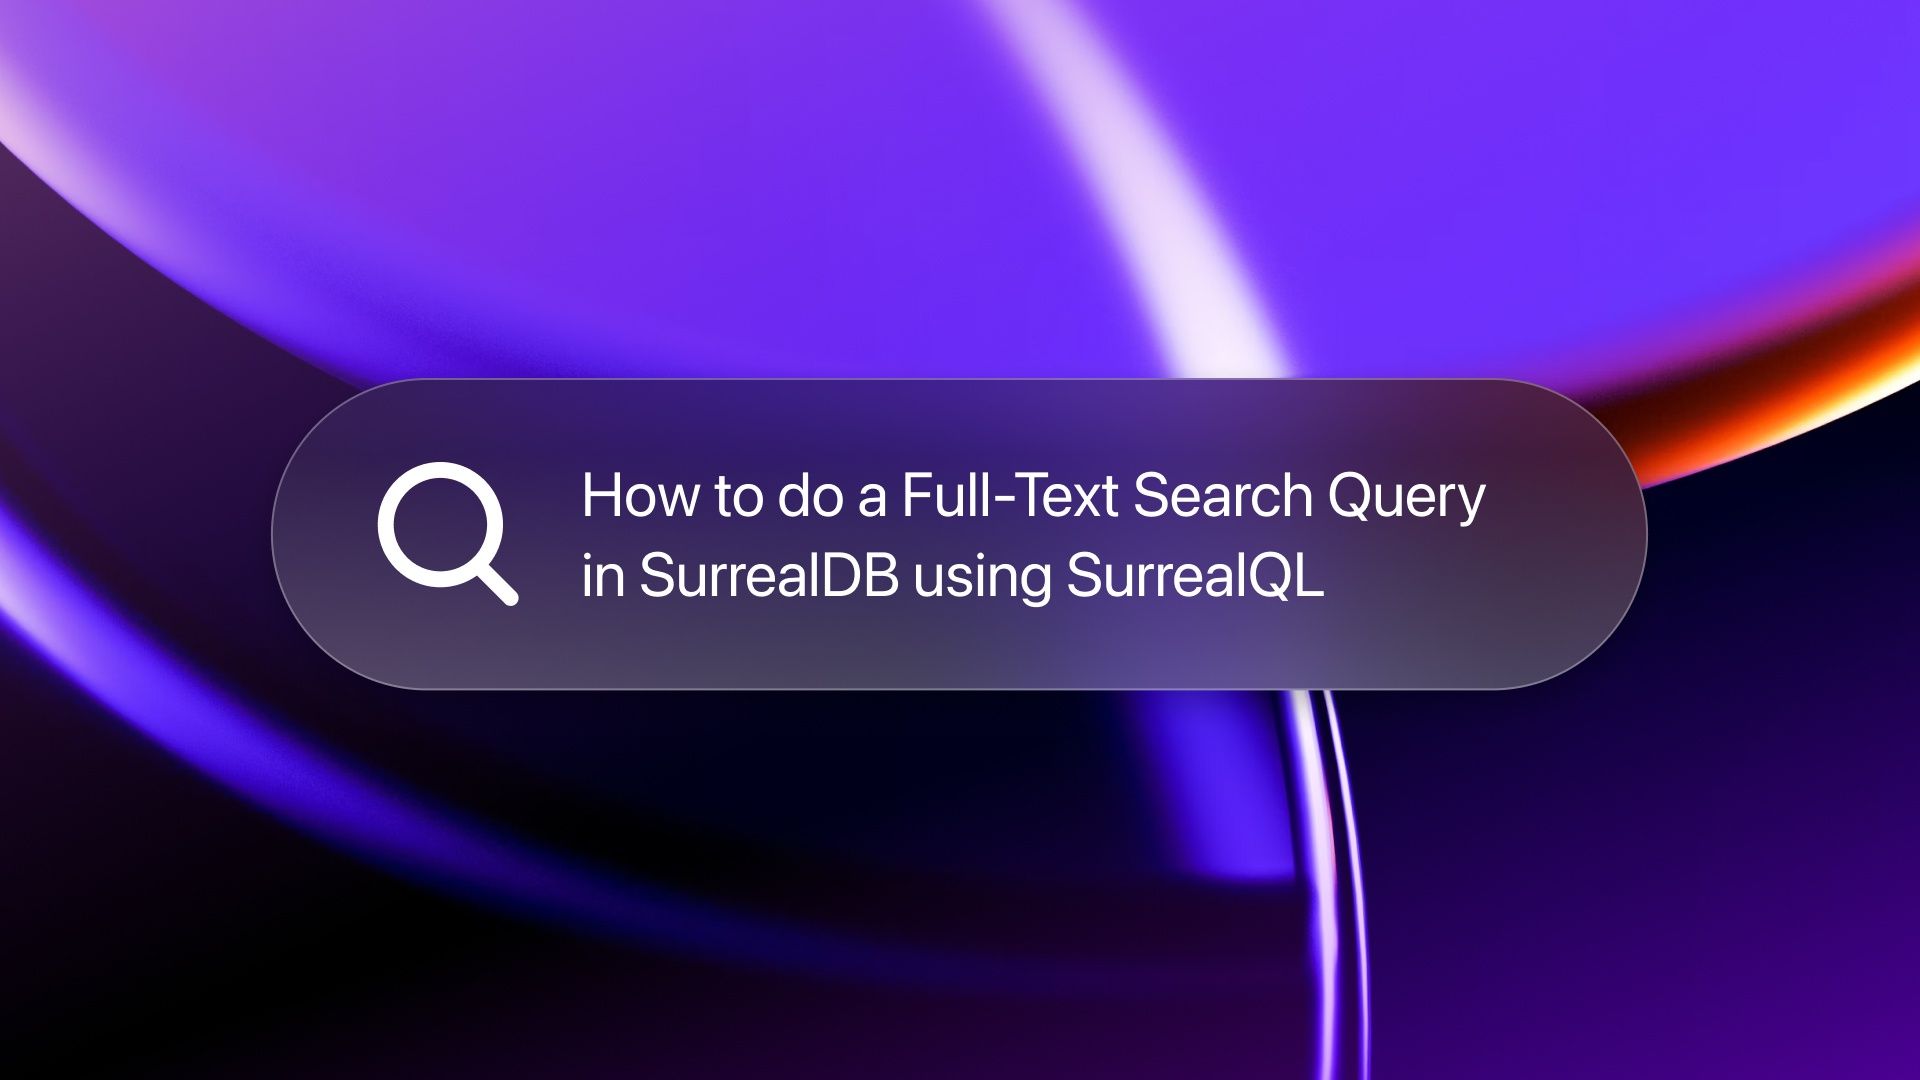 How to do a Full-Text Search Query in SurrealDB using SurrealQL